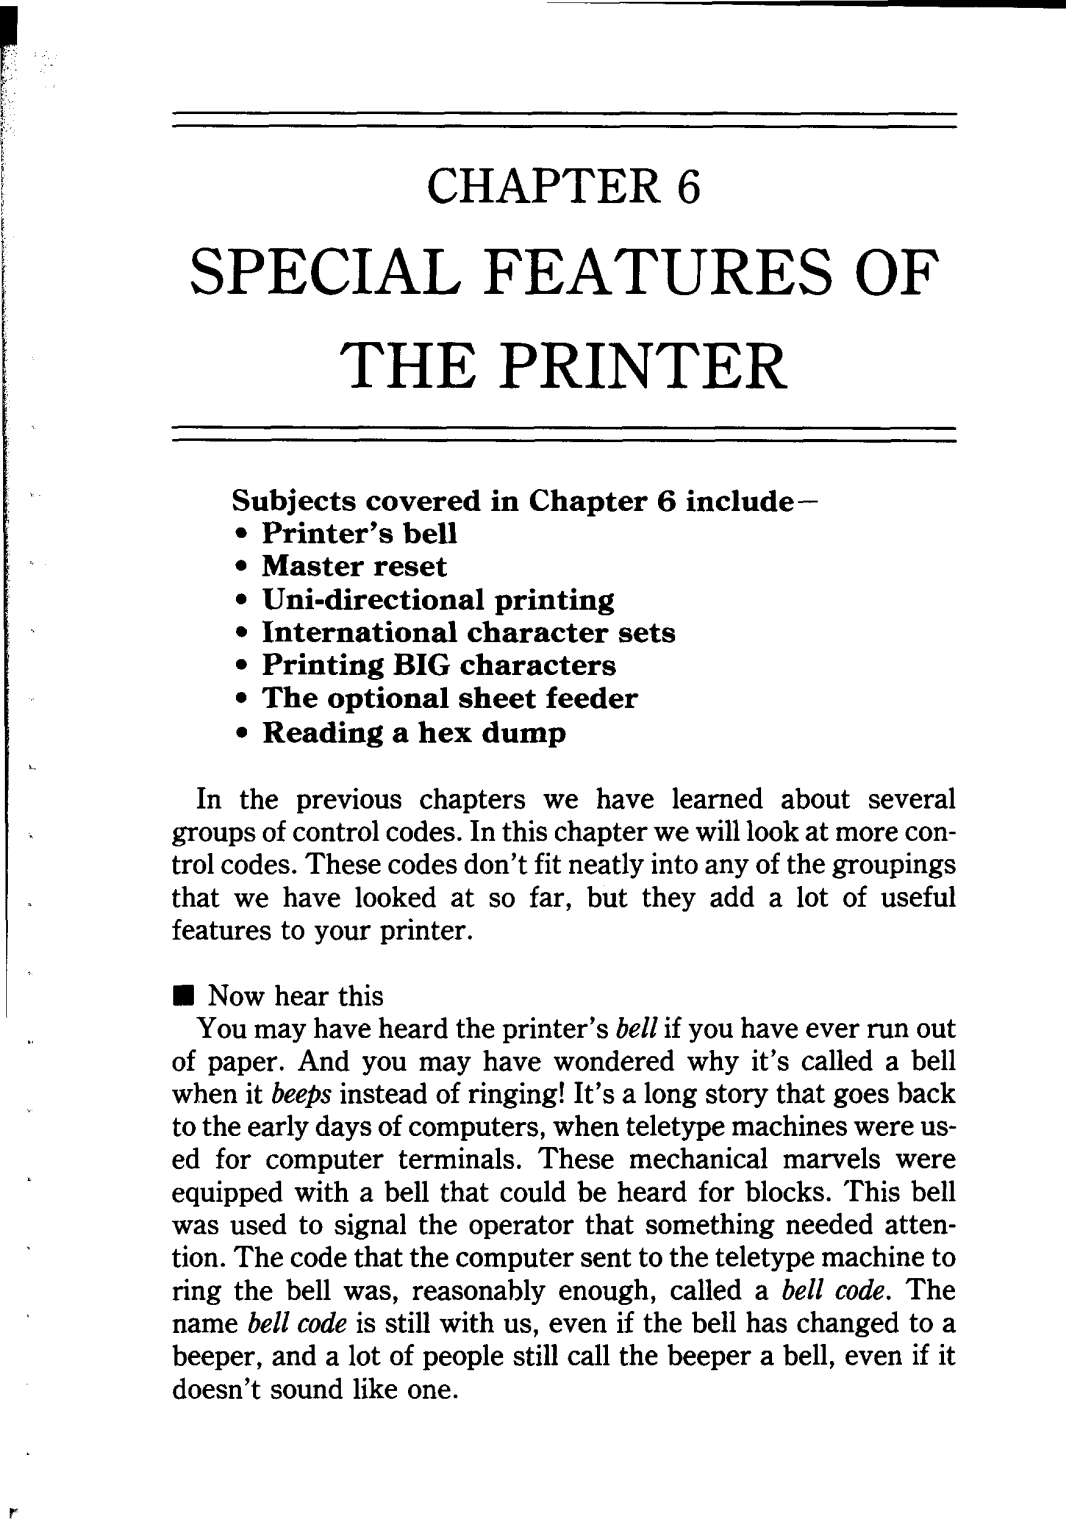 Star Micronics NB24-10/15 Special Features Of The Printer, Chapter, Uni-directional printing International character sets 